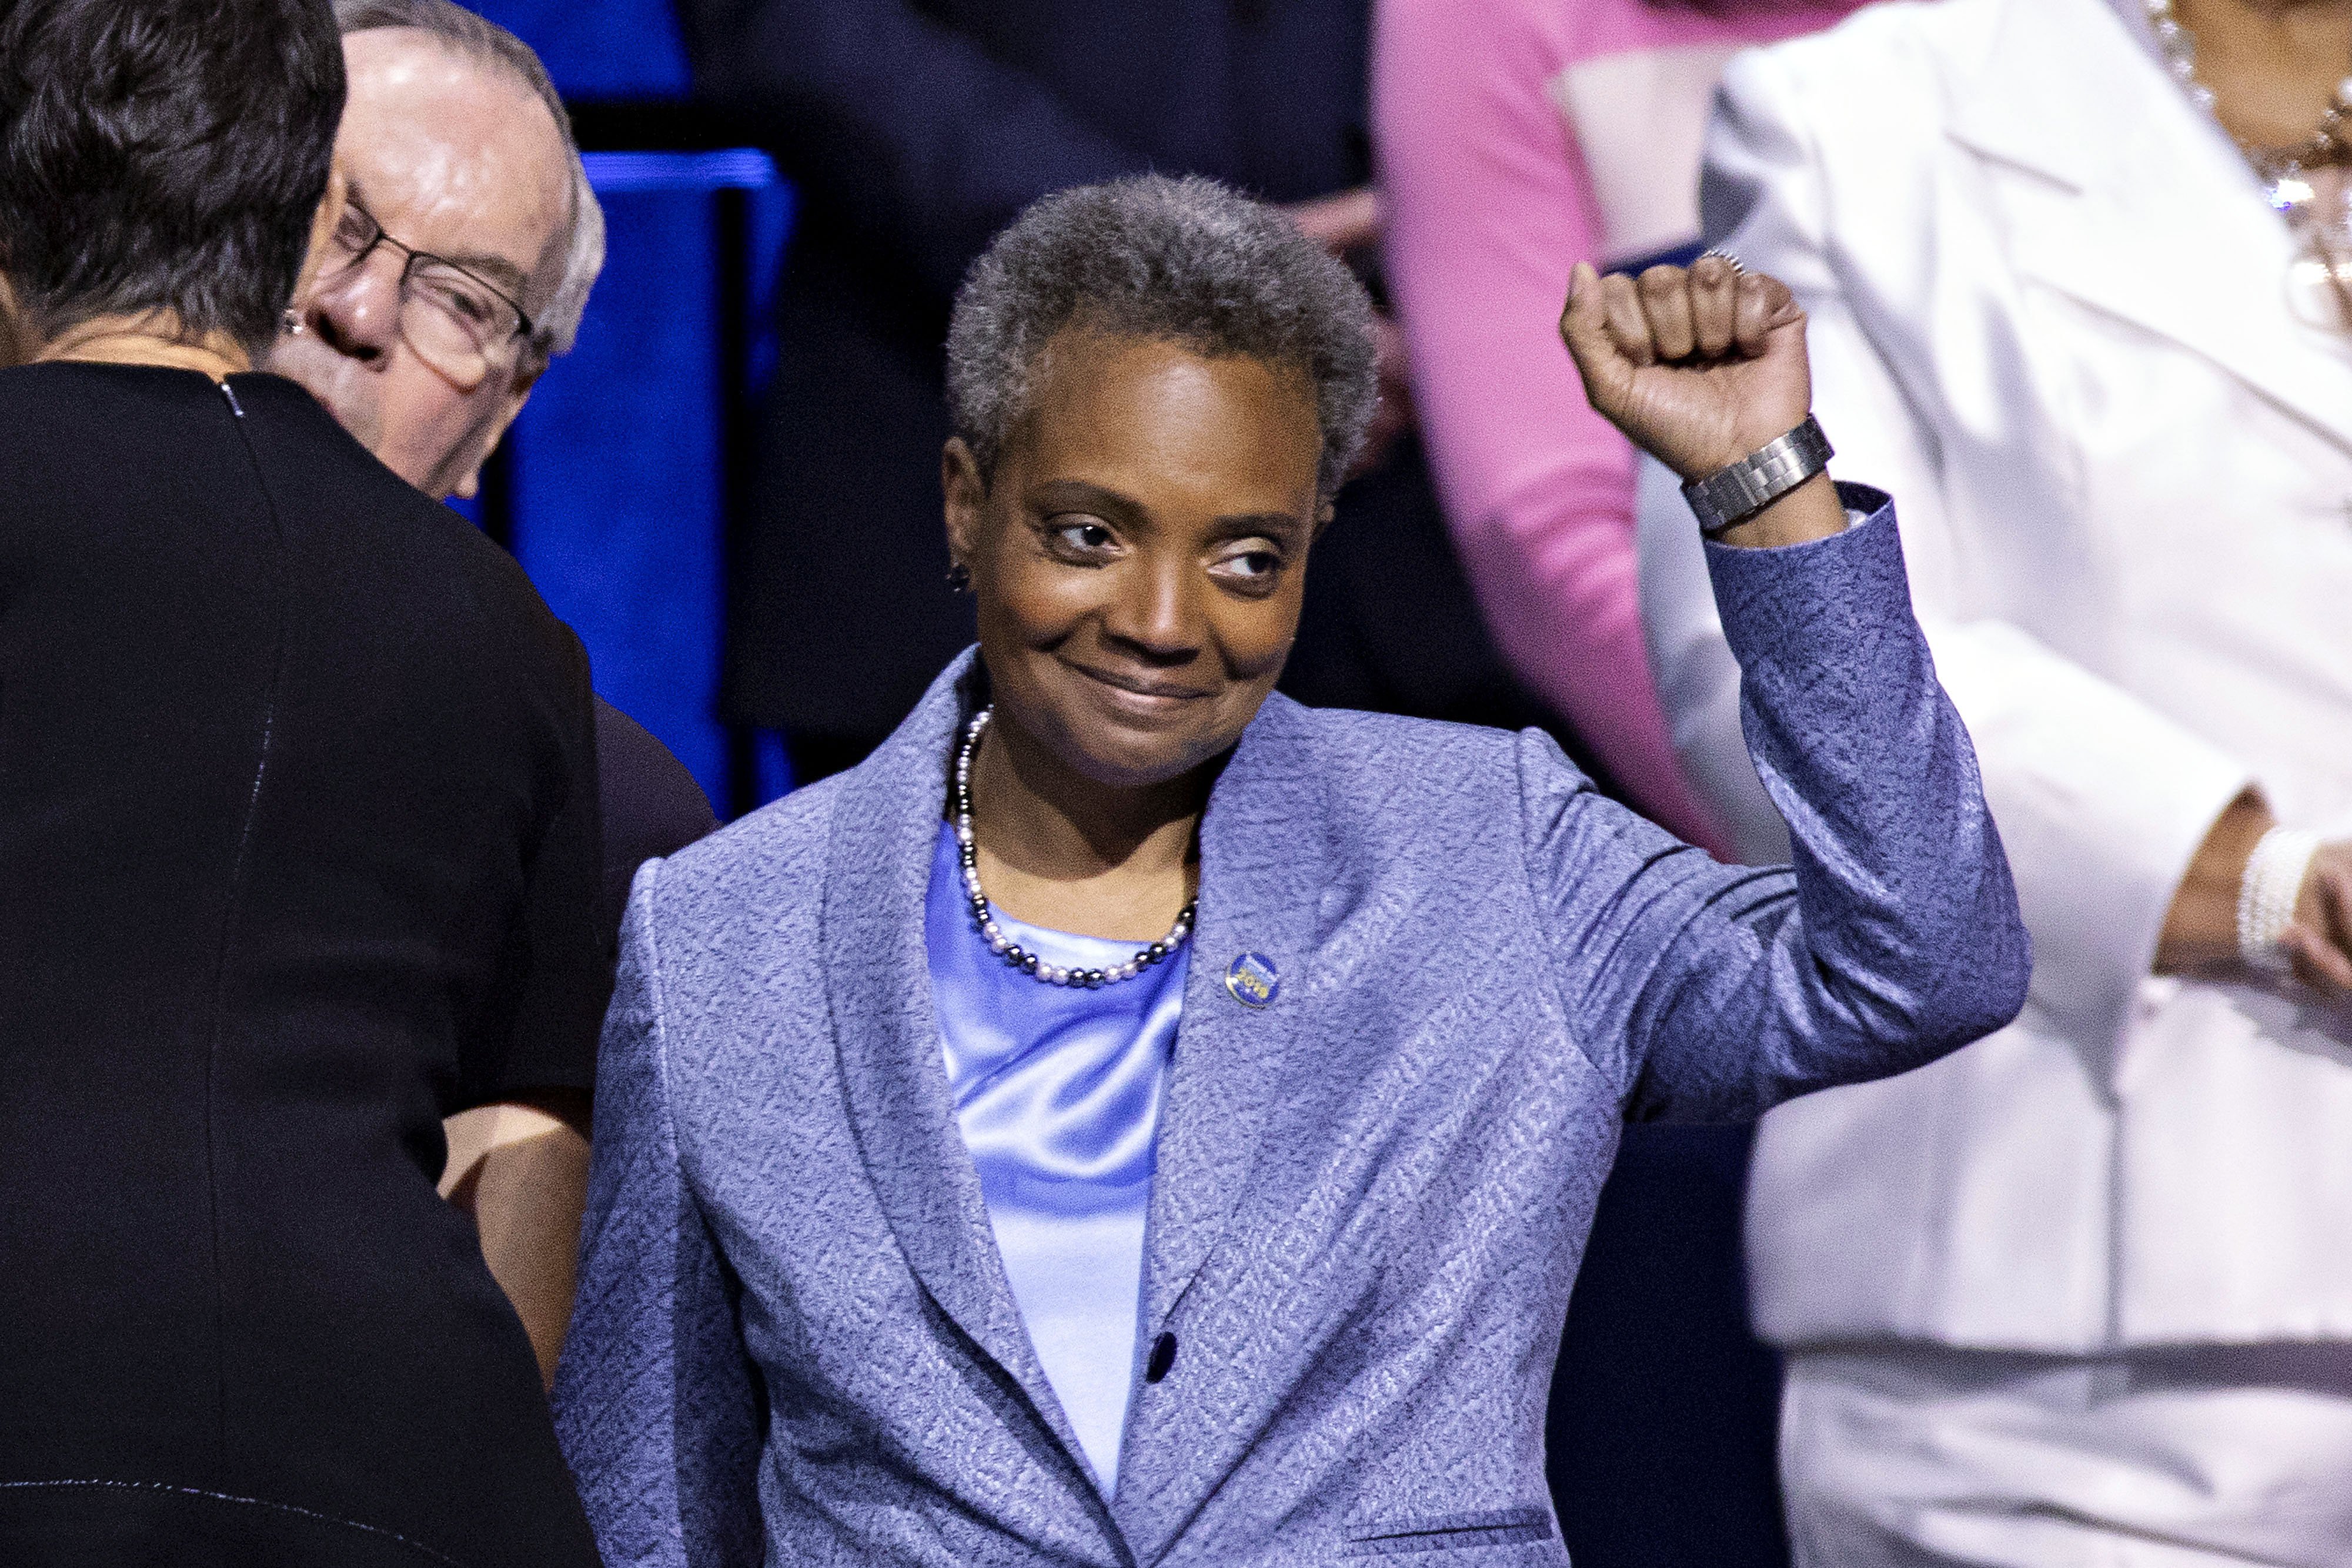 Lori Lightfoot raises her fist during an inauguration ceremony in Chicago, Illinois, on May 20, 2019. | Source: Getty Images